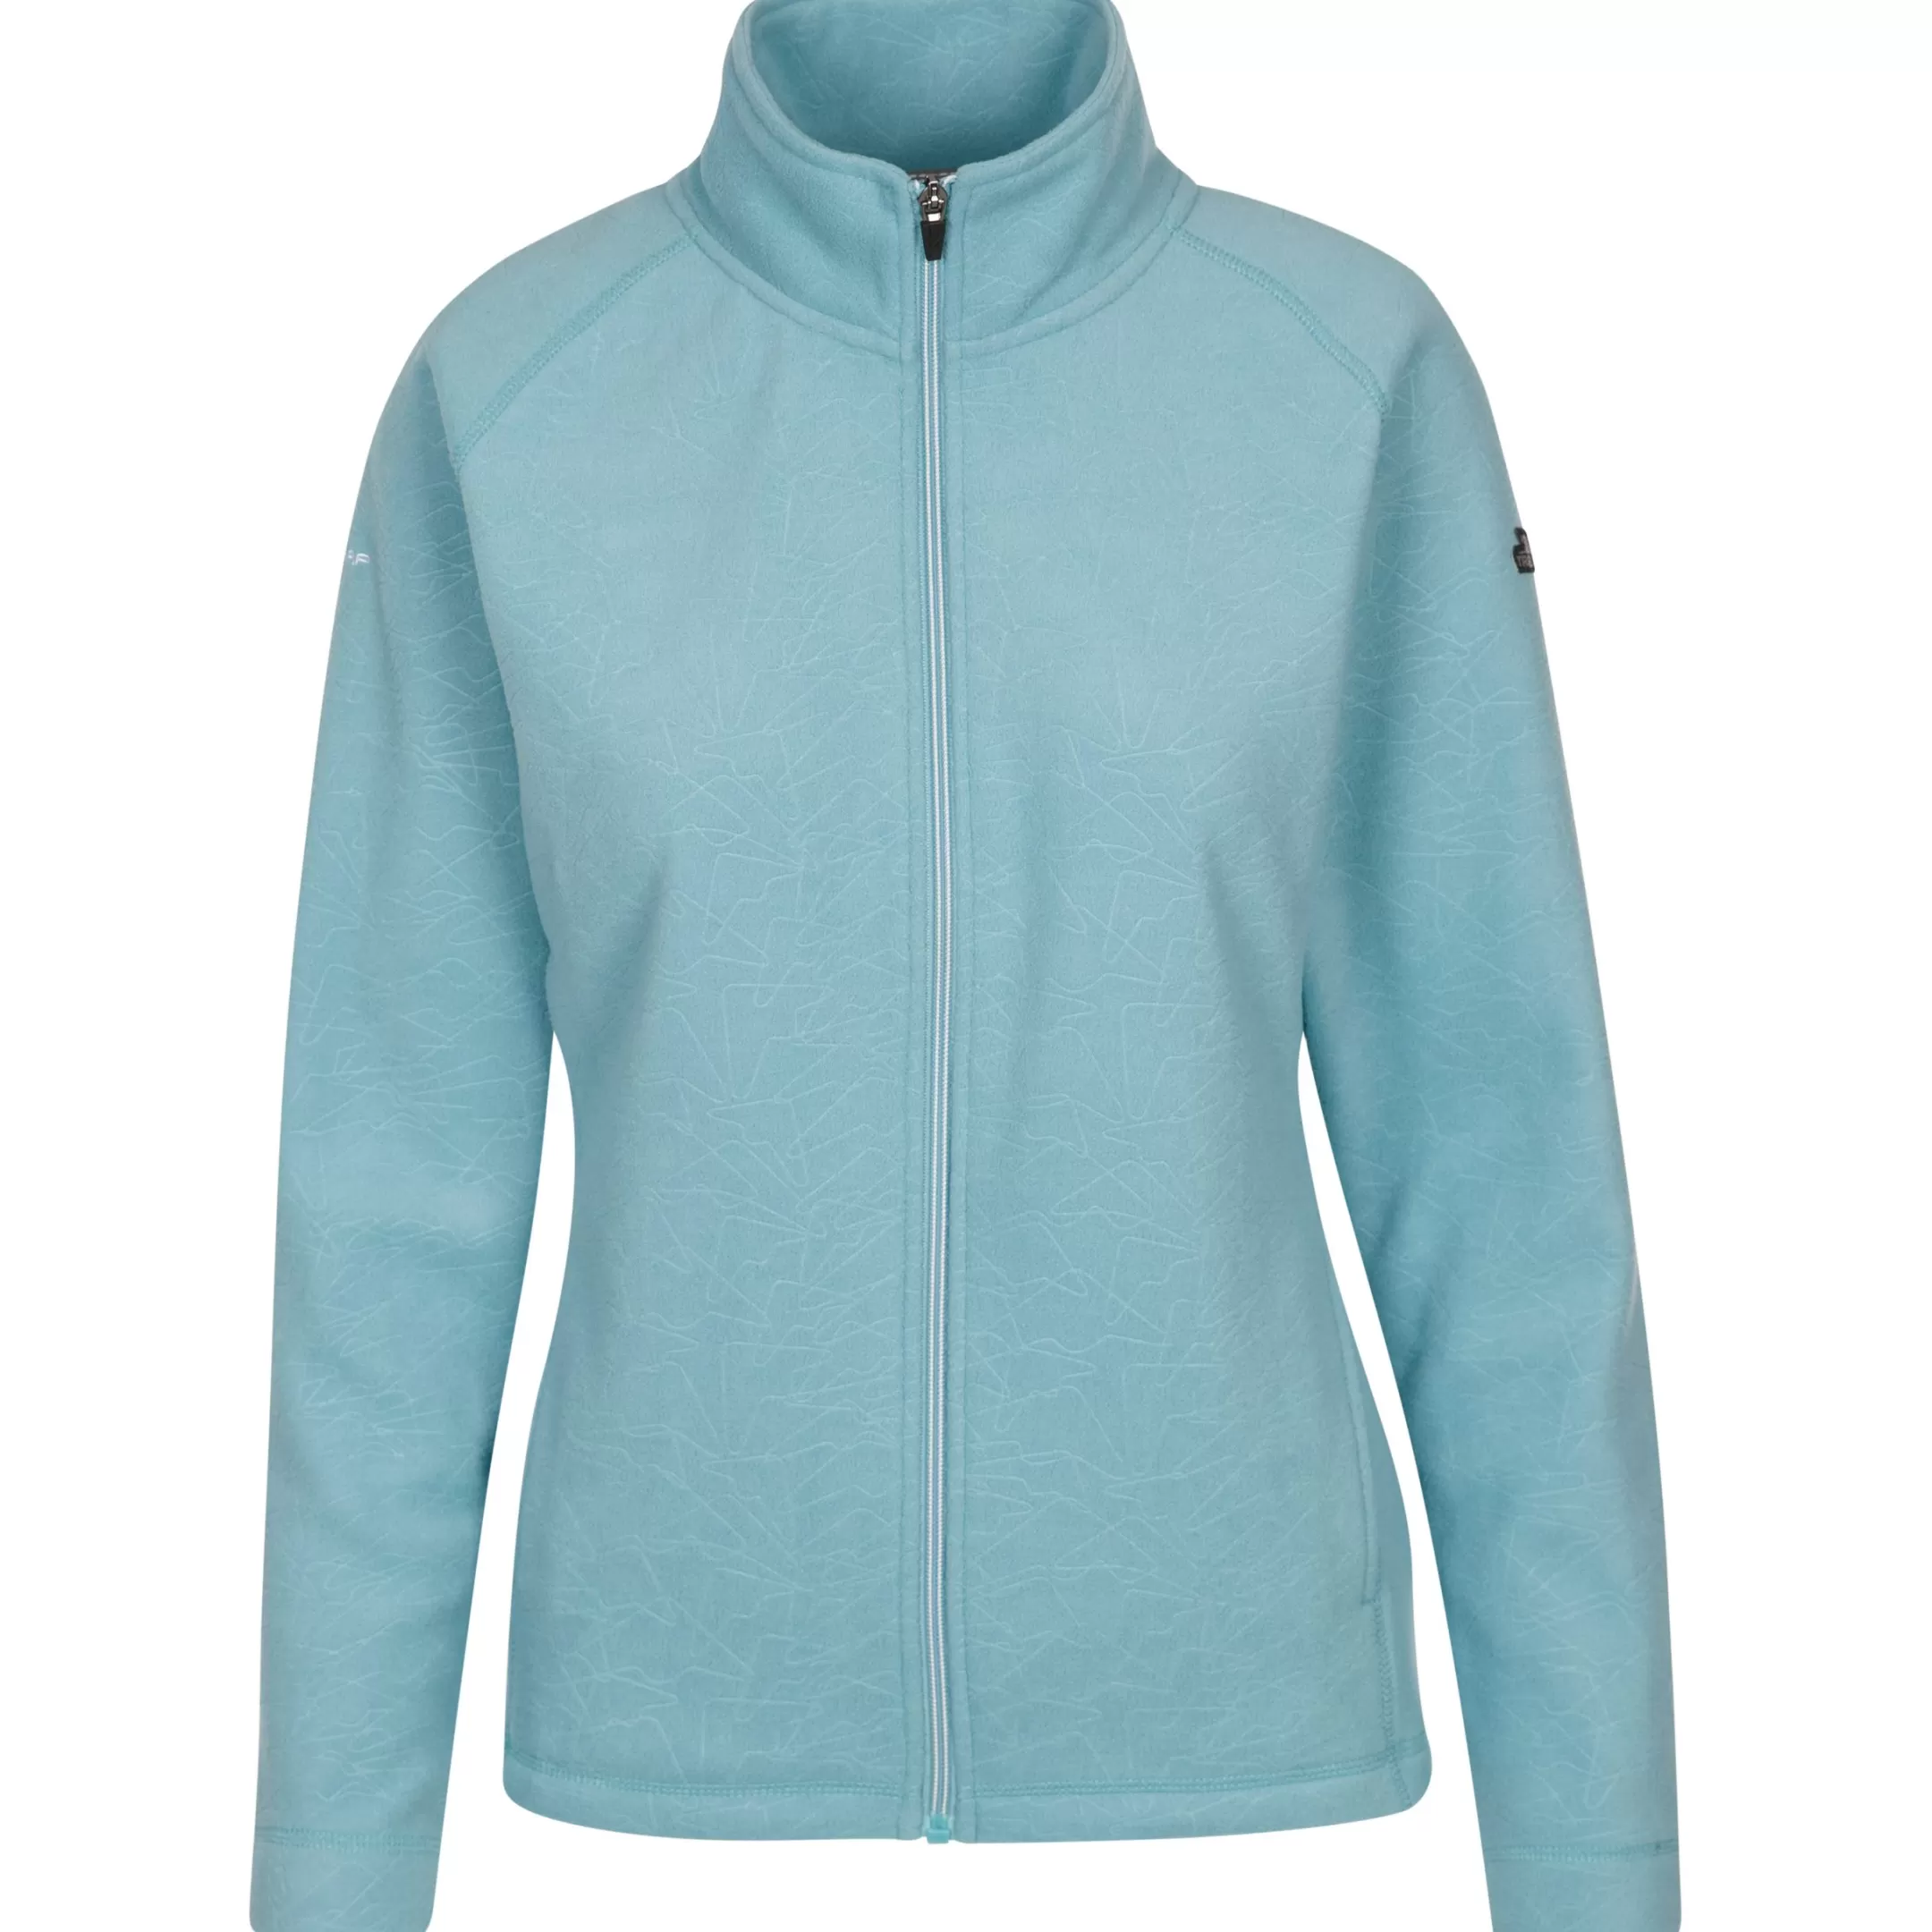 Womens Fleece AT200 Sultry | Trespass Sale